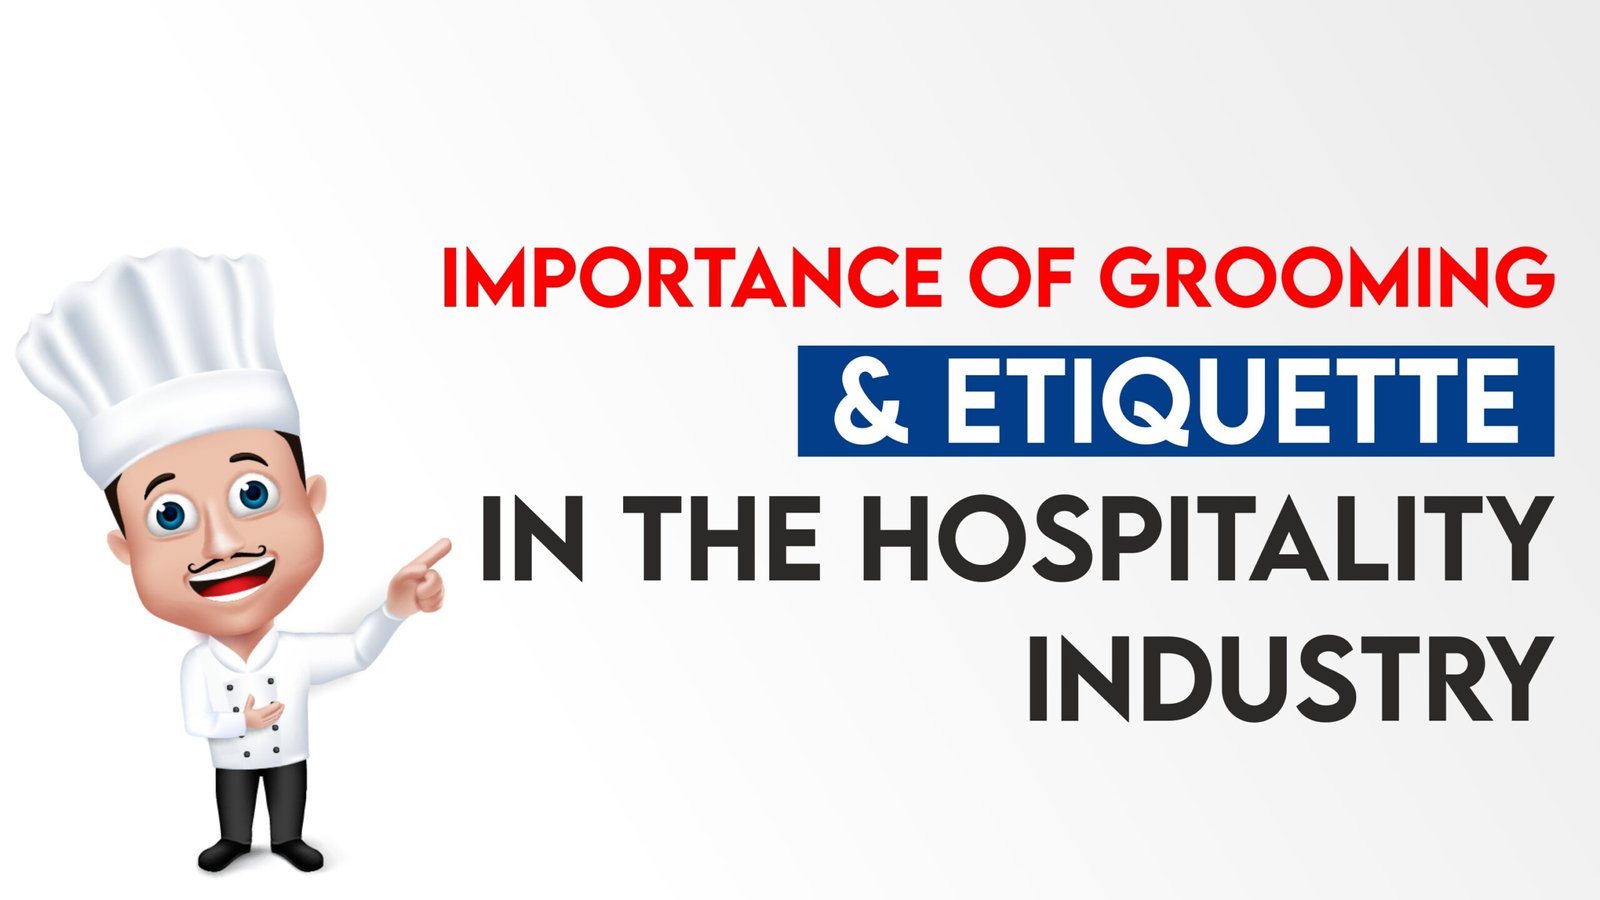 Grooming and Etiquette in the Hospitality Industry